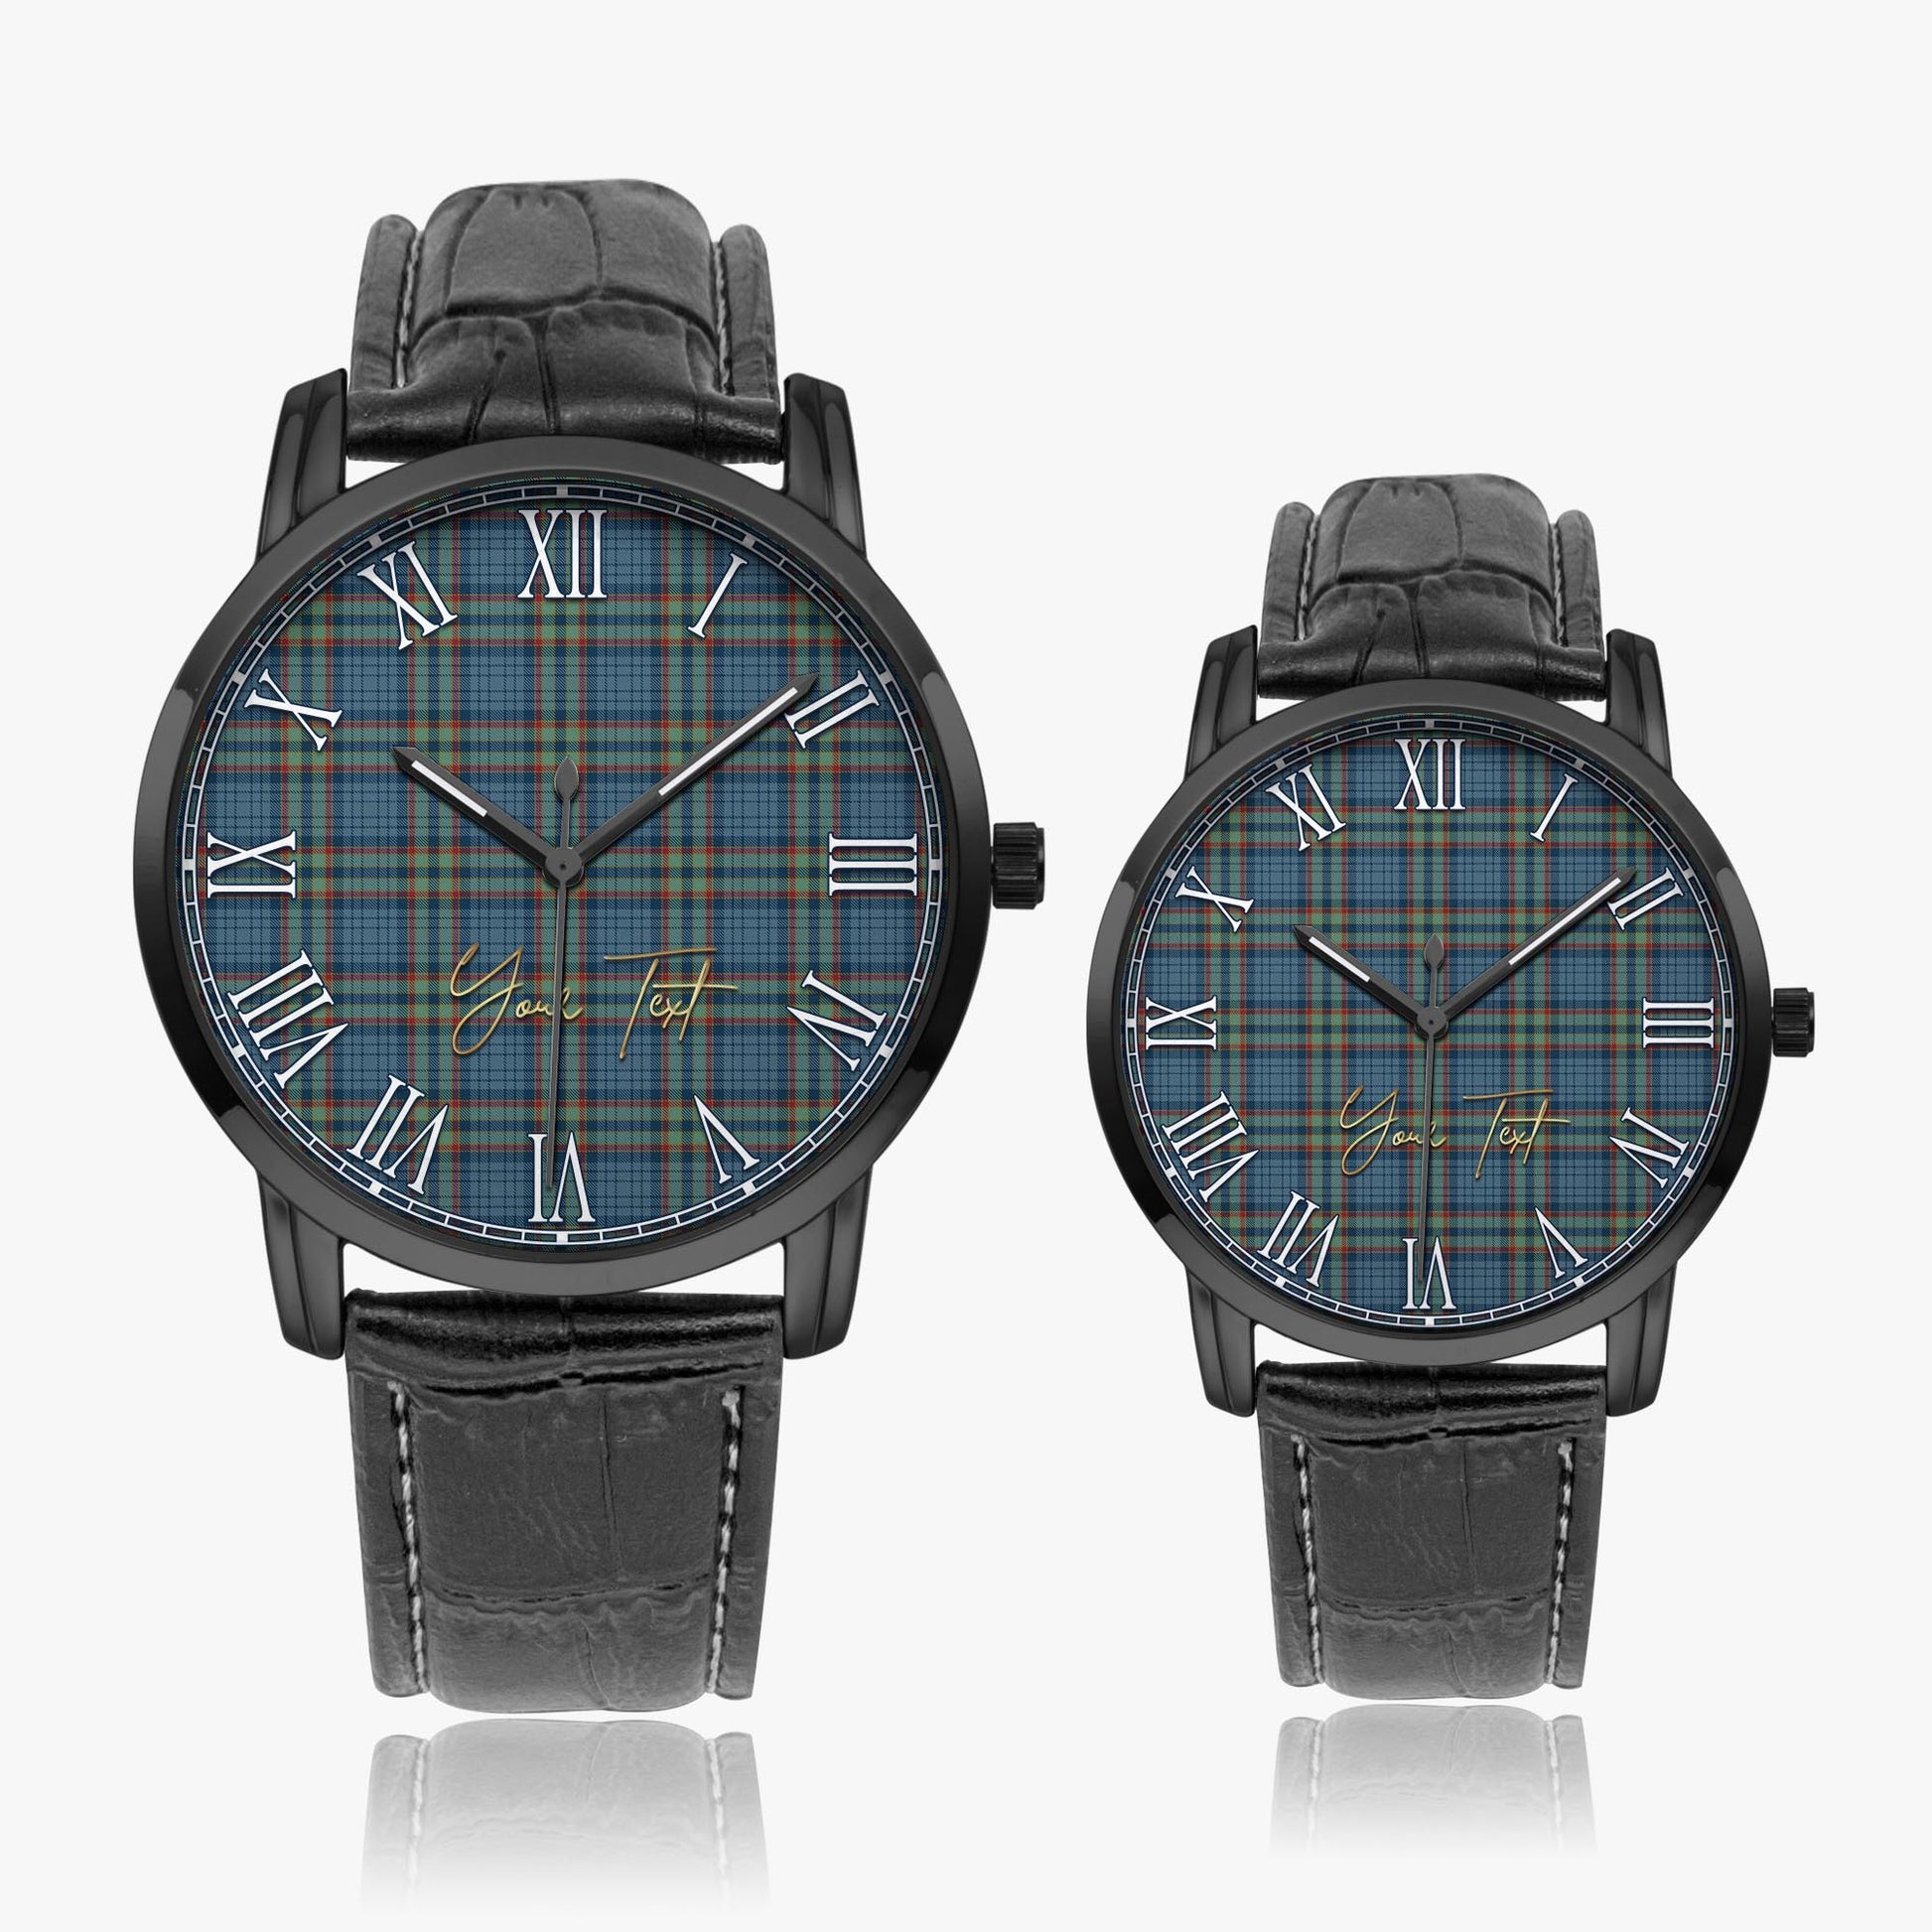 Ralston UK Tartan Personalized Your Text Leather Trap Quartz Watch Wide Type Black Case With Black Leather Strap - Tartanvibesclothing